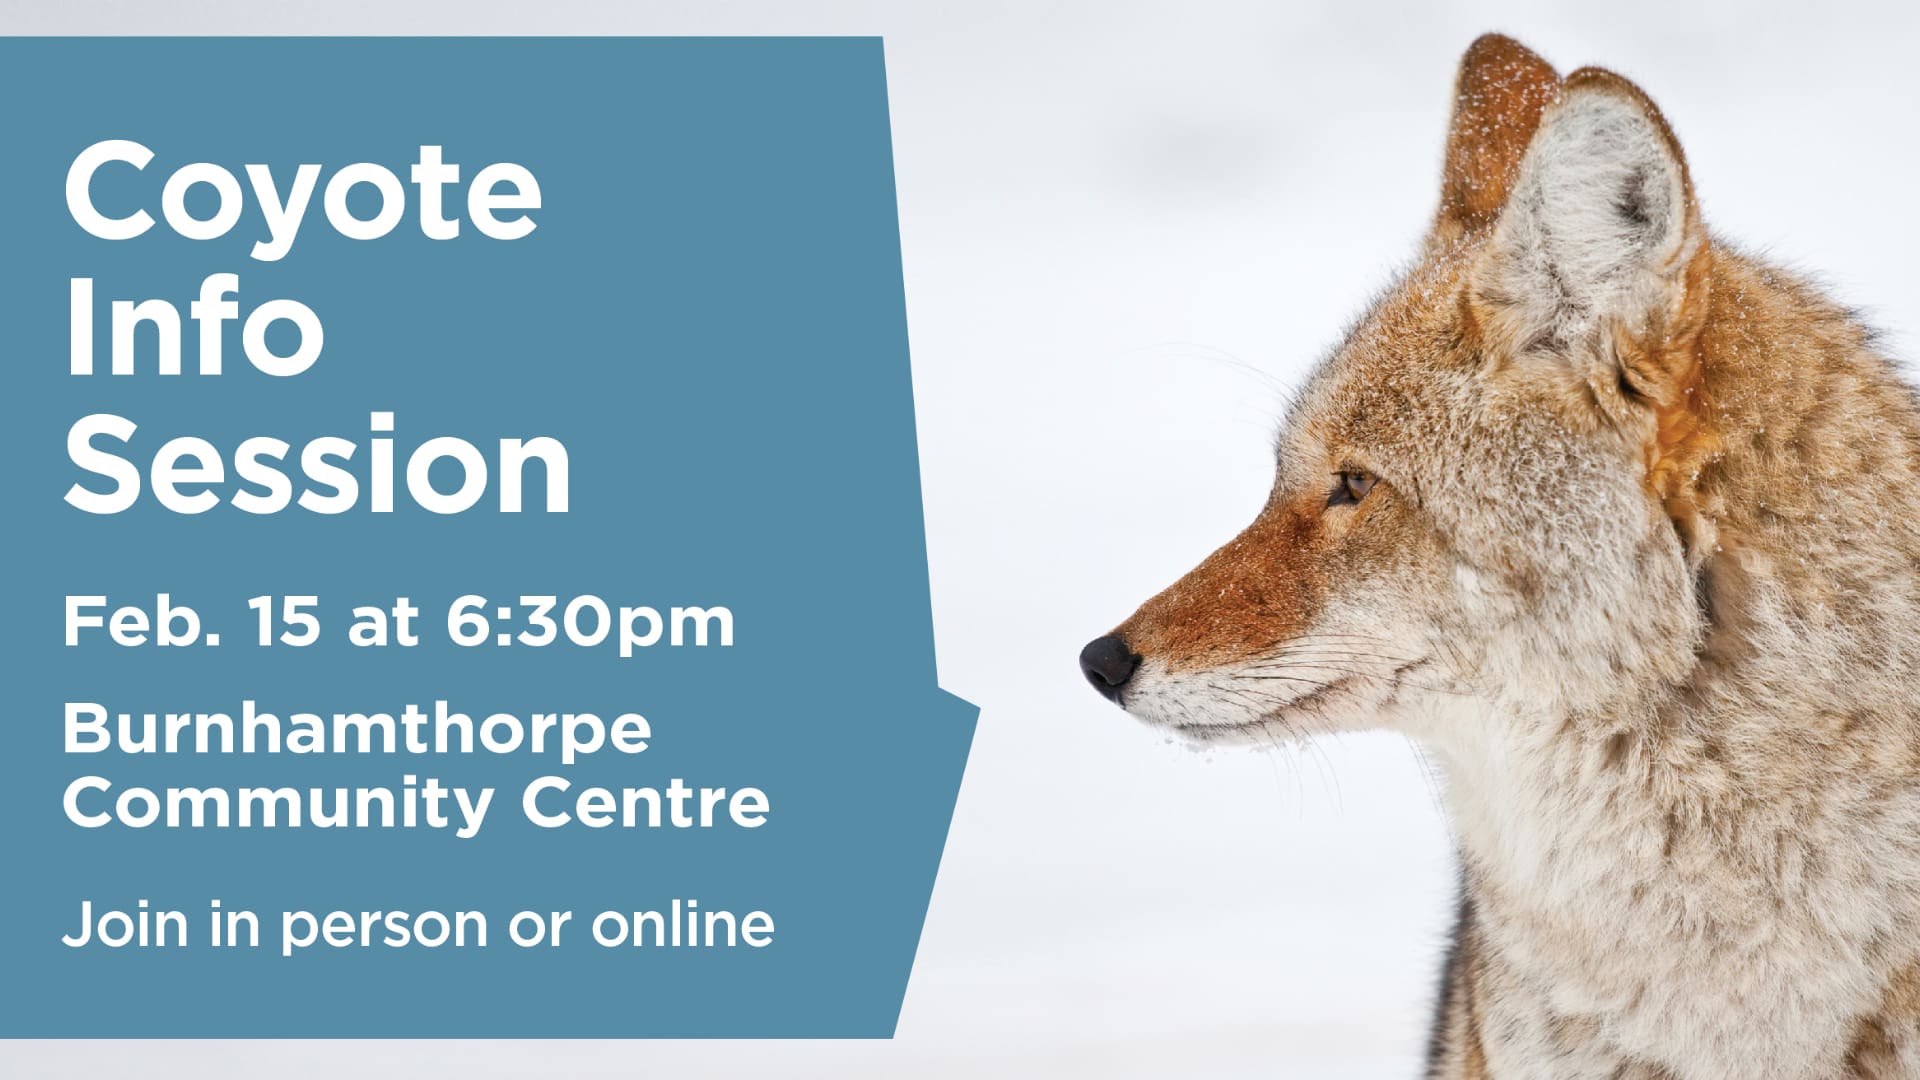 Citywide coyote information session for Mississauga residents